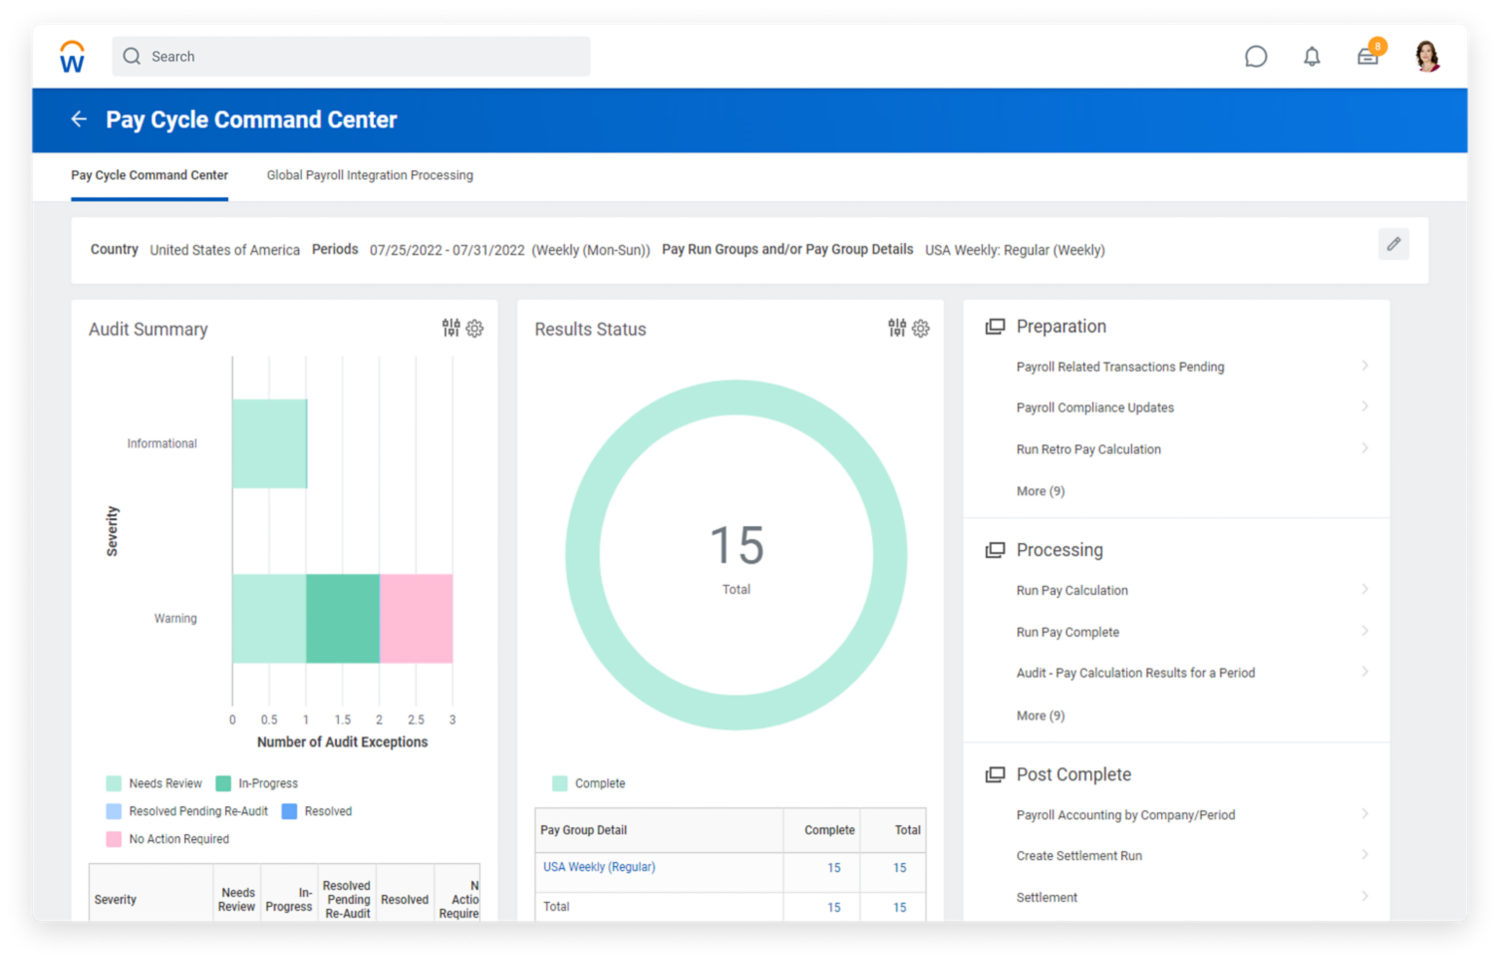 Pay cycle command center dashboard with graphs for audit summary, results status, and accounting summary